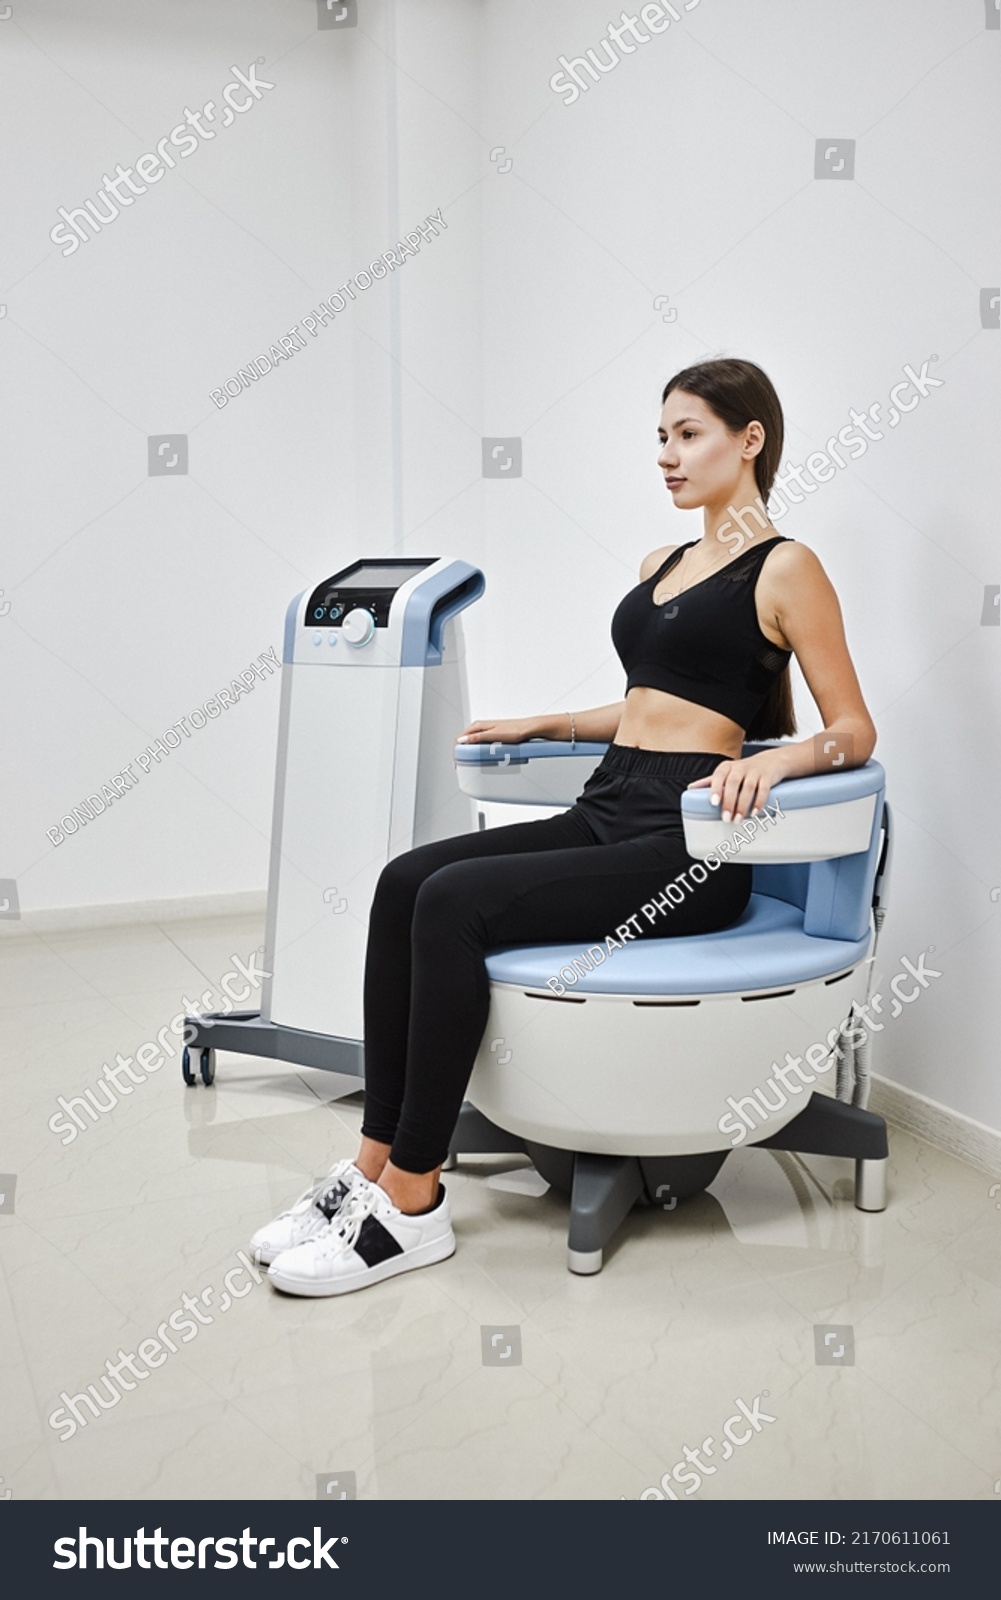 Young woman sitting on electromagnetic chair for stimulation of deep pelvic floor muscles and restoring neuromuscular control at the clinic #2170611061